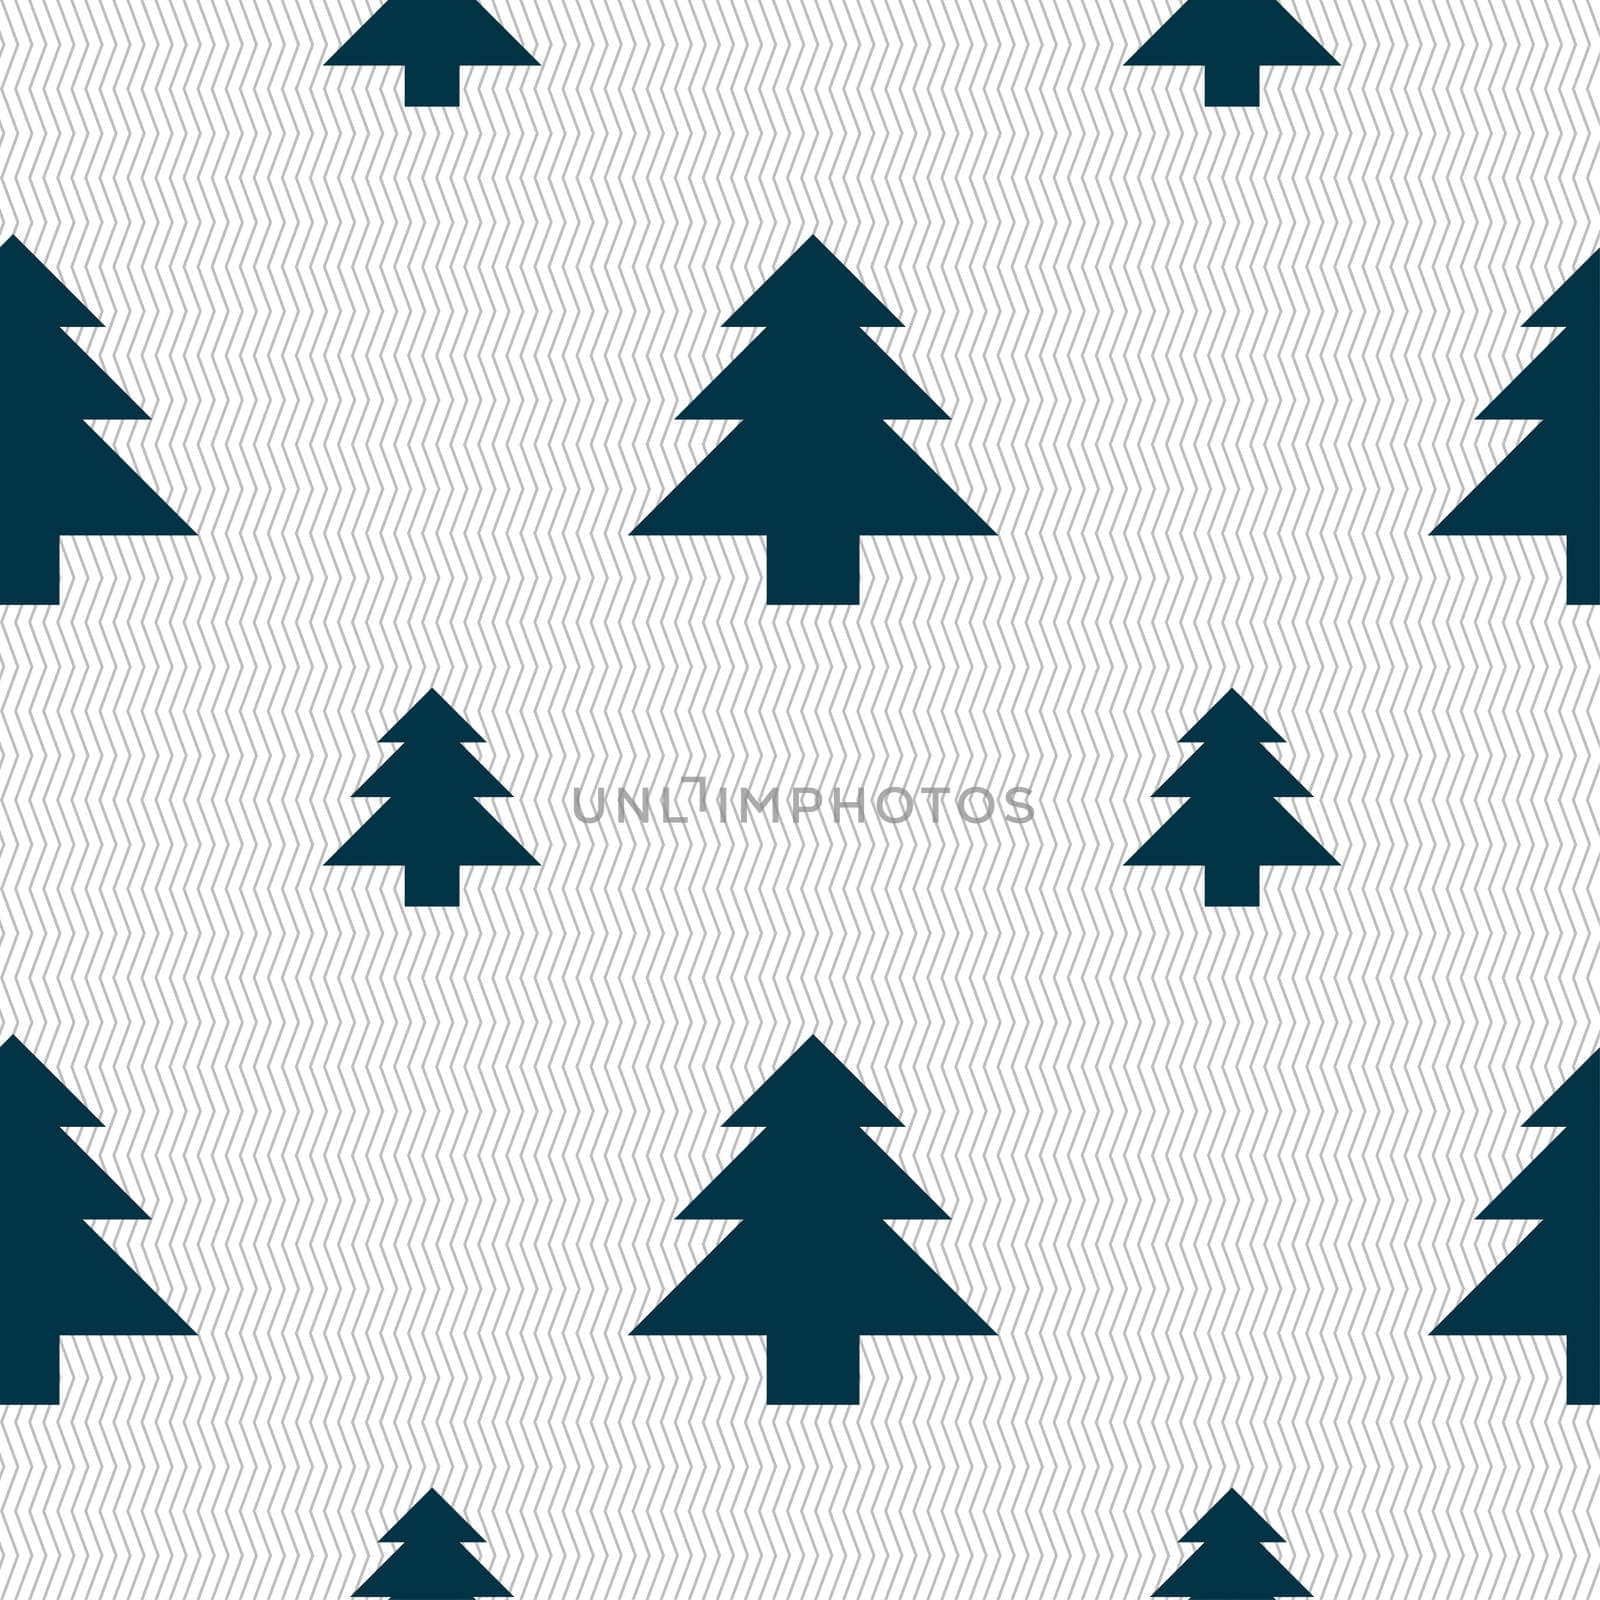 Christmas tree icon sign. Seamless pattern with geometric texture. illustration